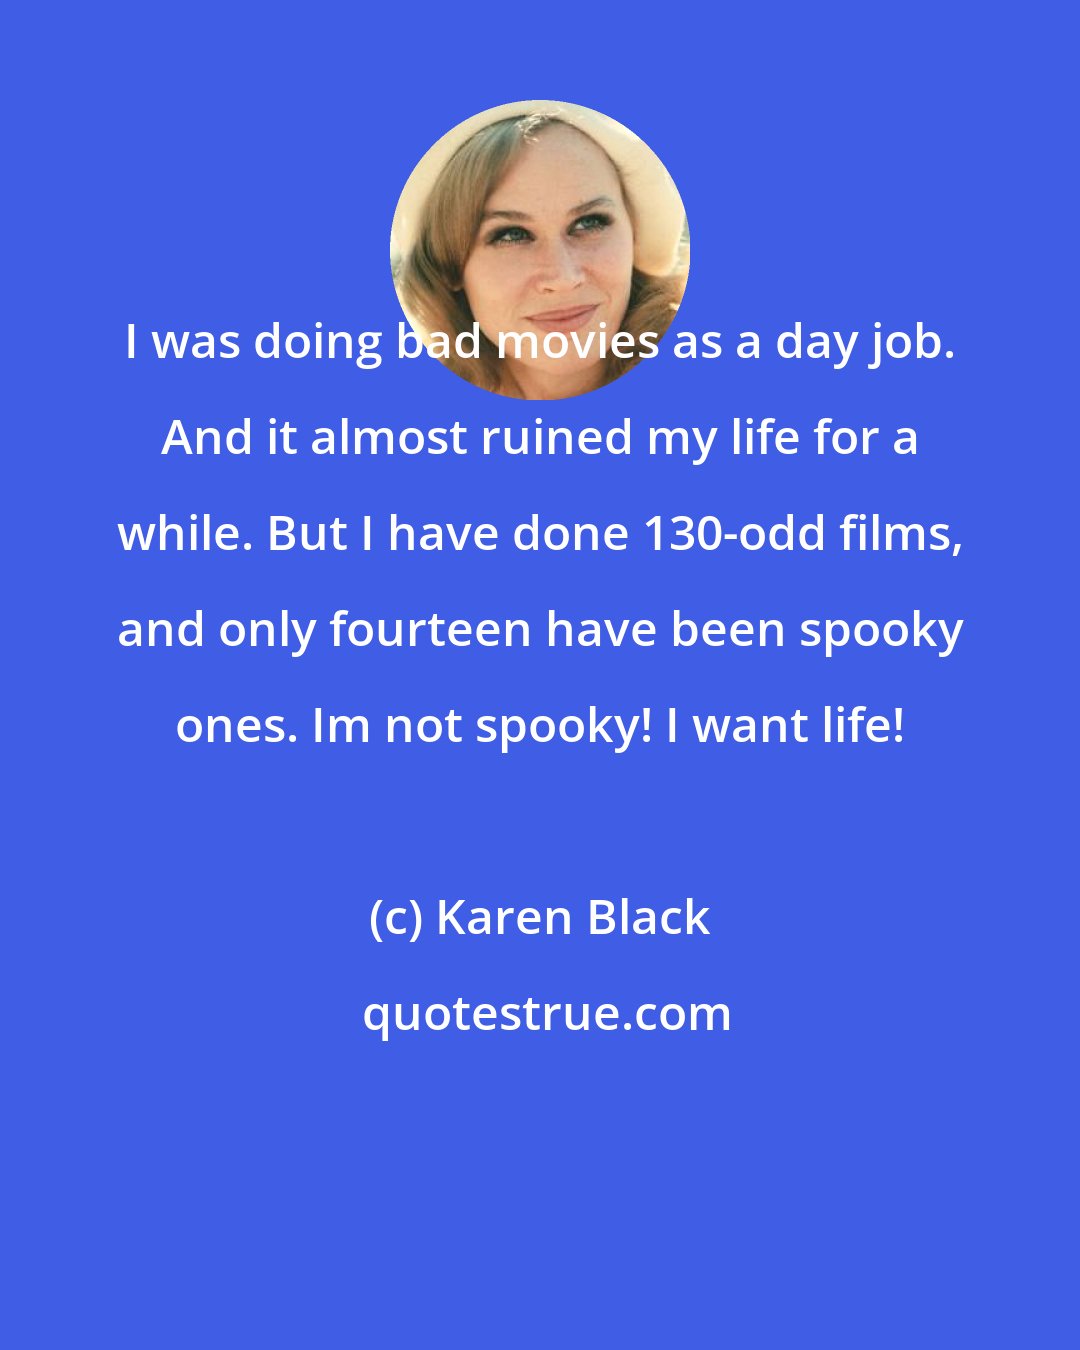 Karen Black: I was doing bad movies as a day job. And it almost ruined my life for a while. But I have done 130-odd films, and only fourteen have been spooky ones. Im not spooky! I want life!